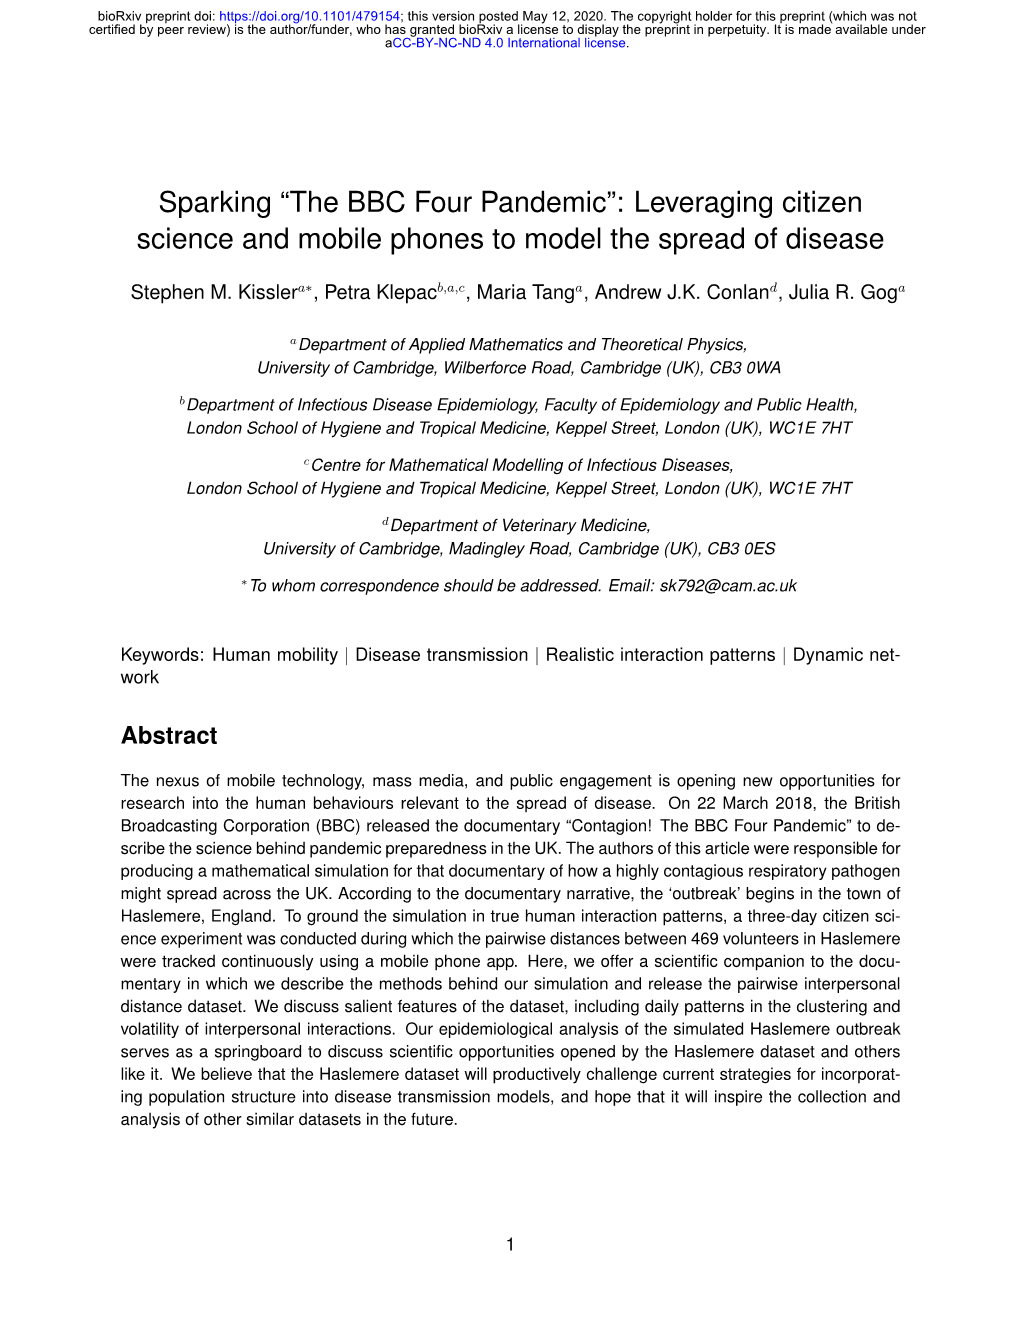 Sparking “The BBC Four Pandemic”: Leveraging Citizen Science and Mobile Phones to Model the Spread of Disease